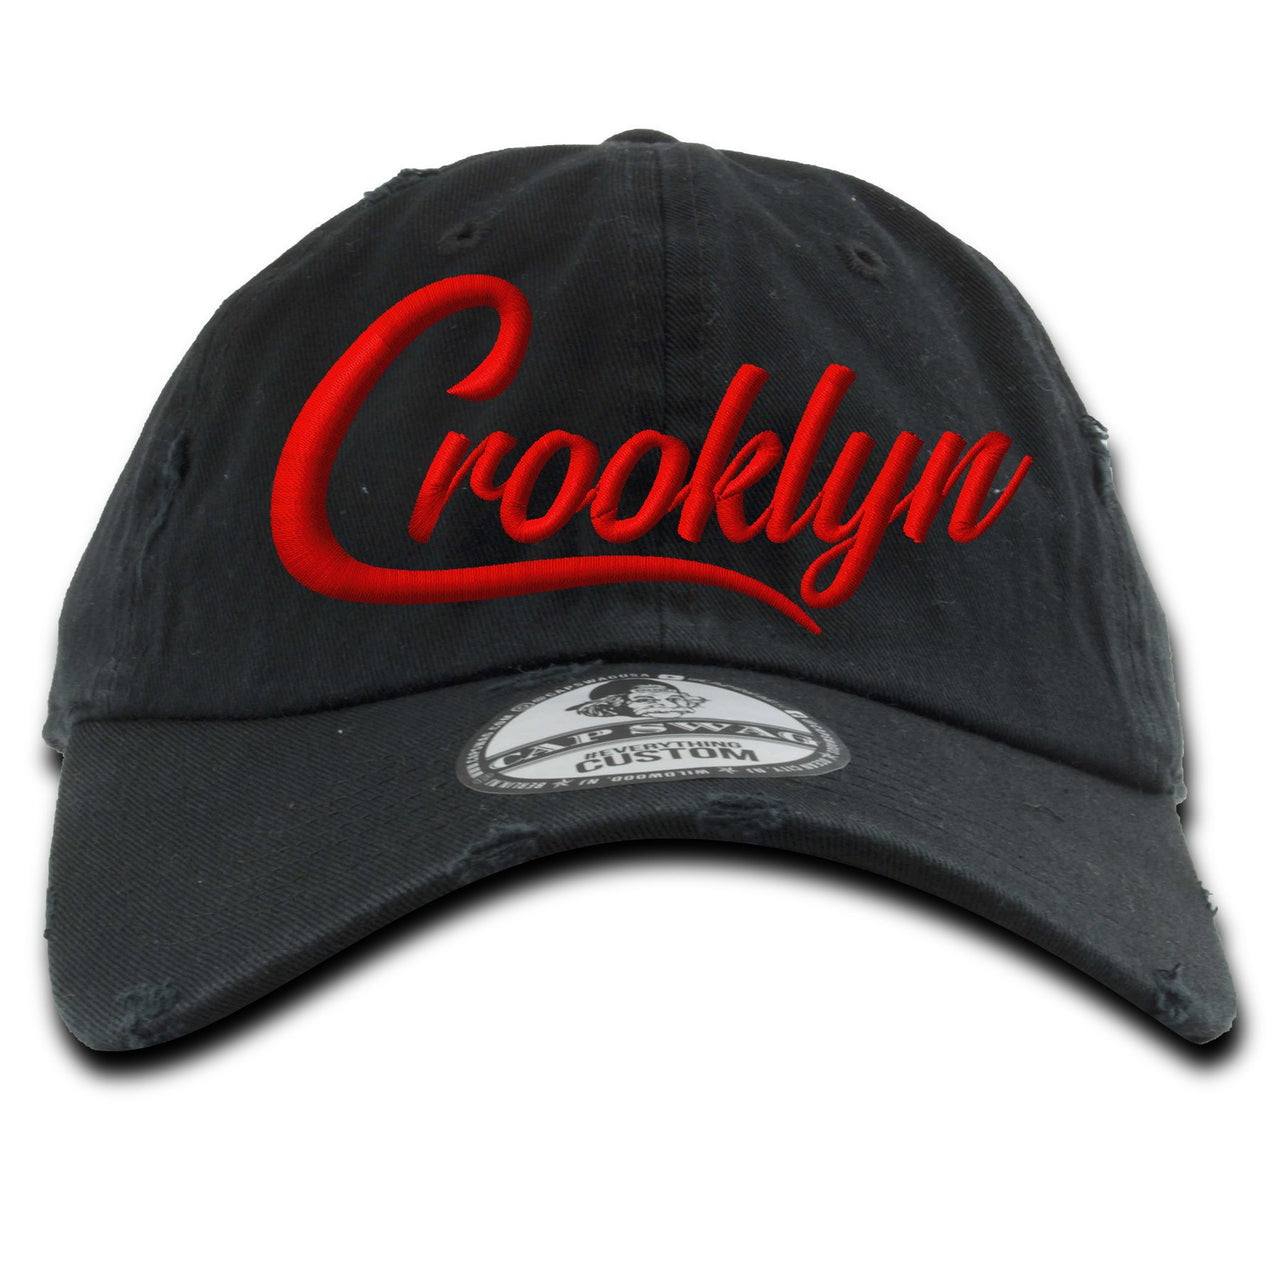 White University Red Pluses Distressed Dad Hat | Crooklyn, Black